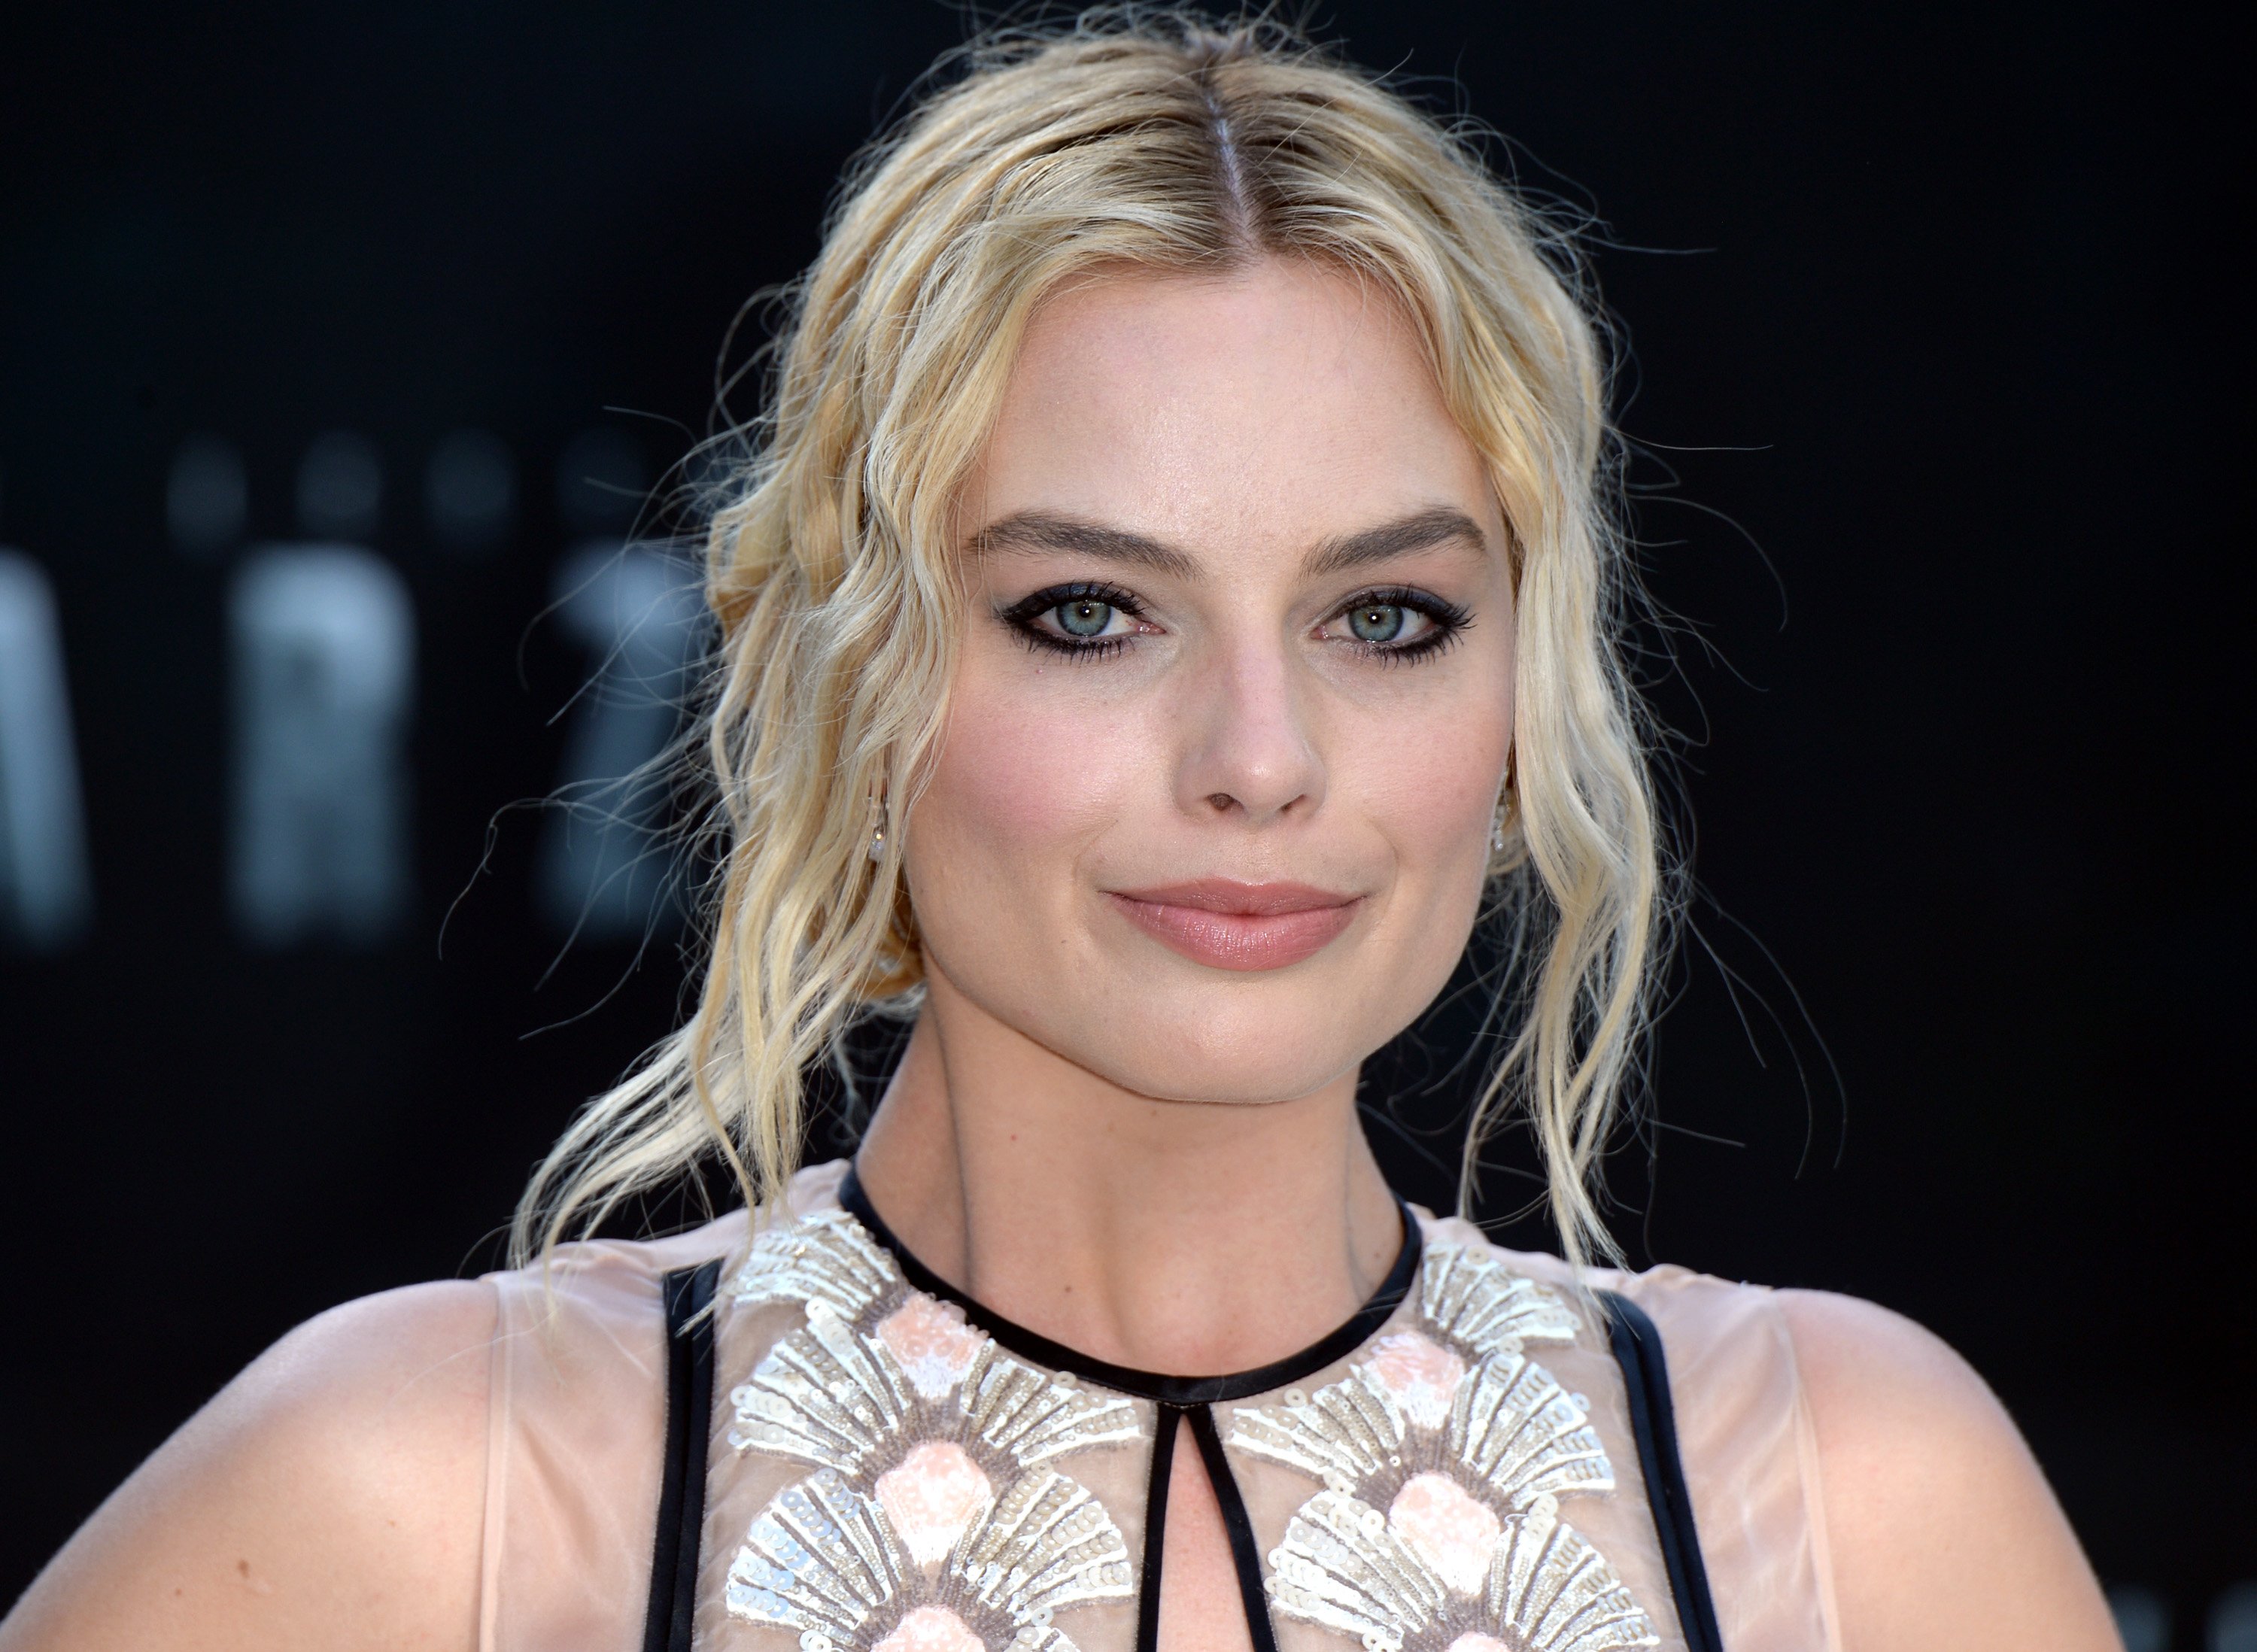  Margot Robbie attends the European premiere of "The Legend of Tarzan” in London on July 5, 2016. | Source: Getty Images